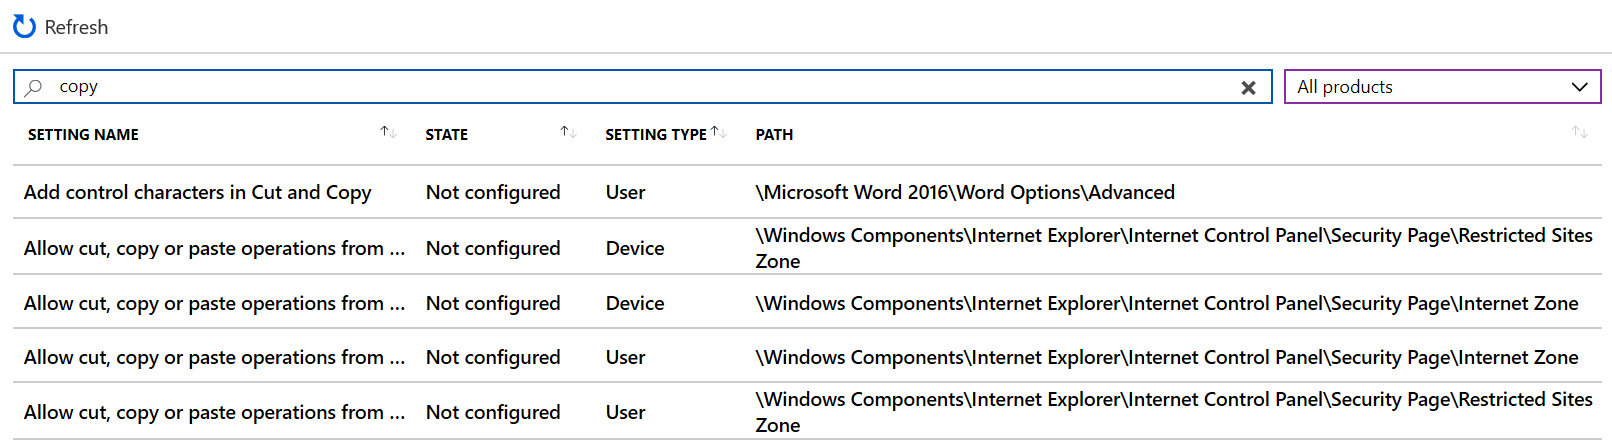 Search for copy to show all the device settings in administrative templates in Microsoft Intune and Intune admin center.